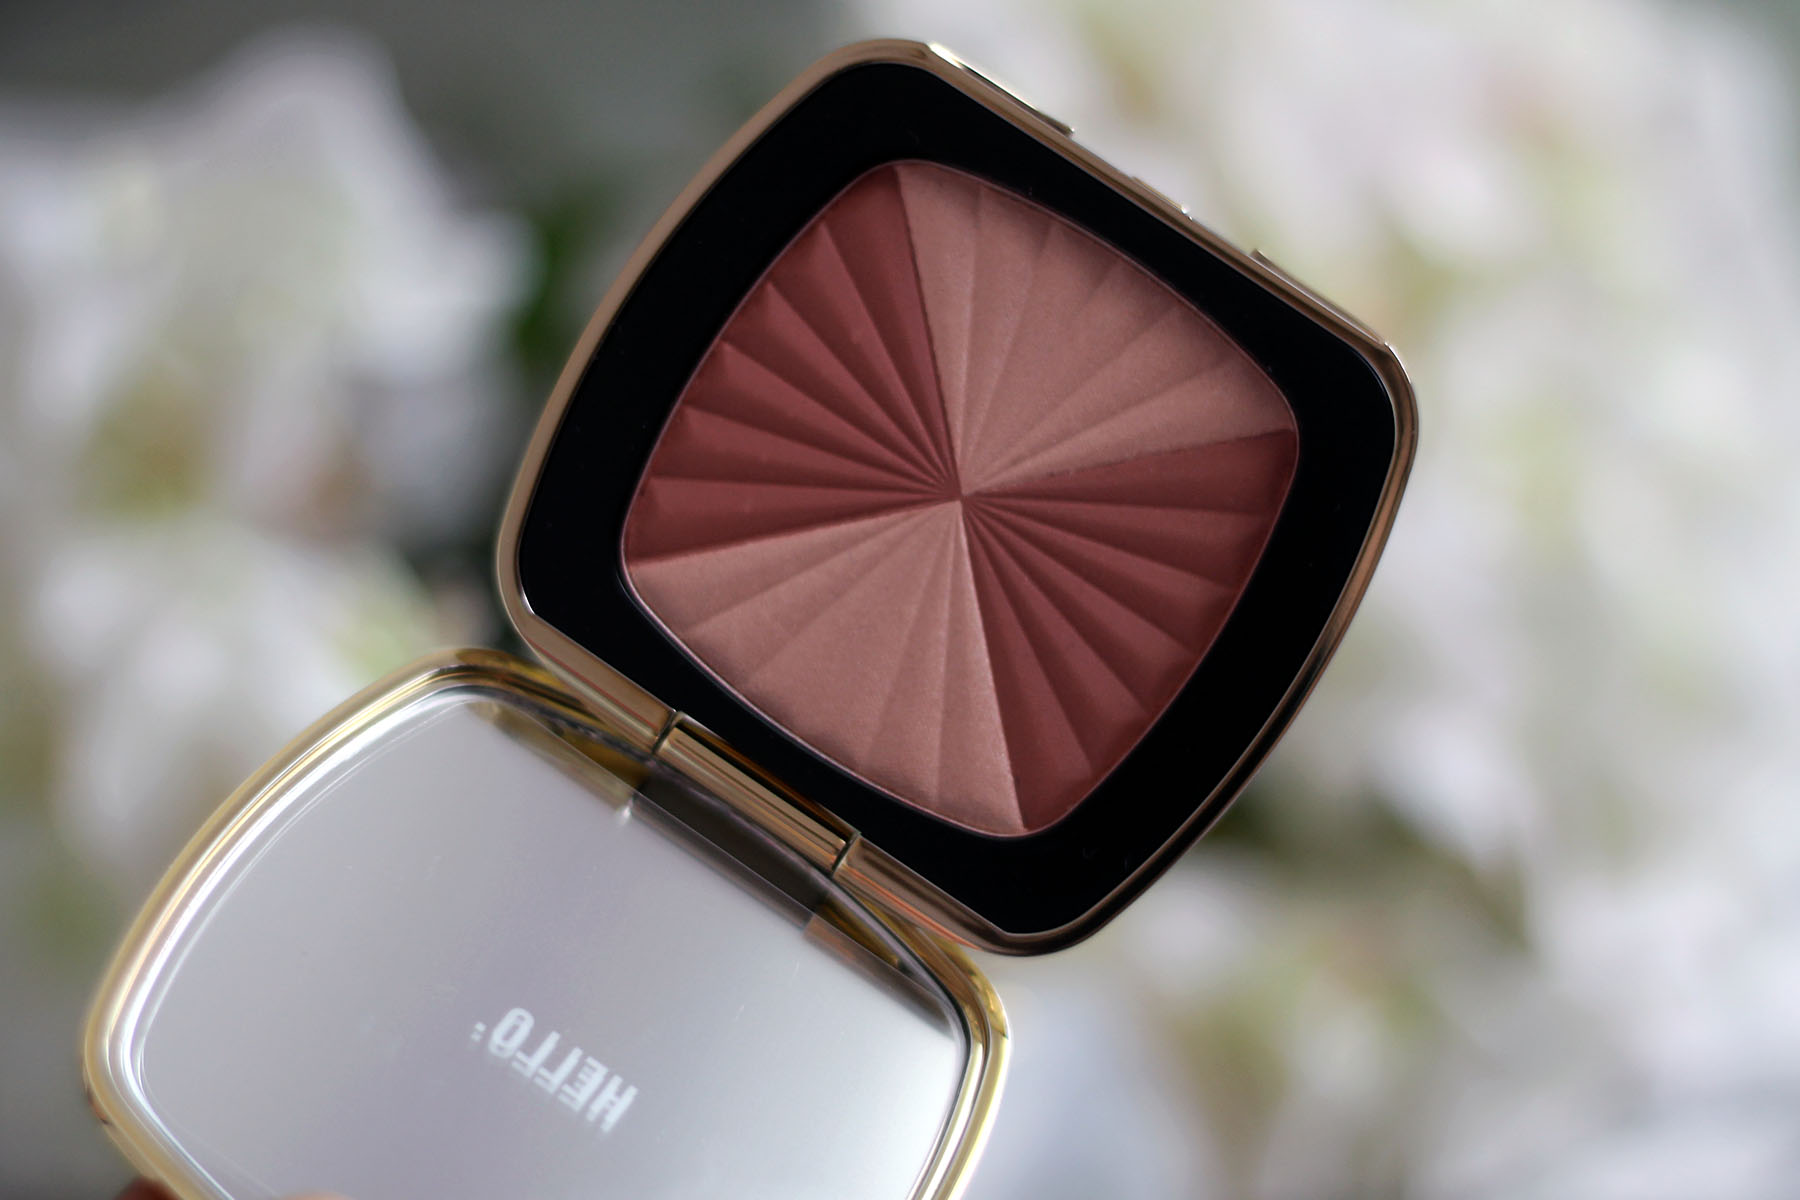 bareminerals-makeup-blush-review-trend-beautyblog-look